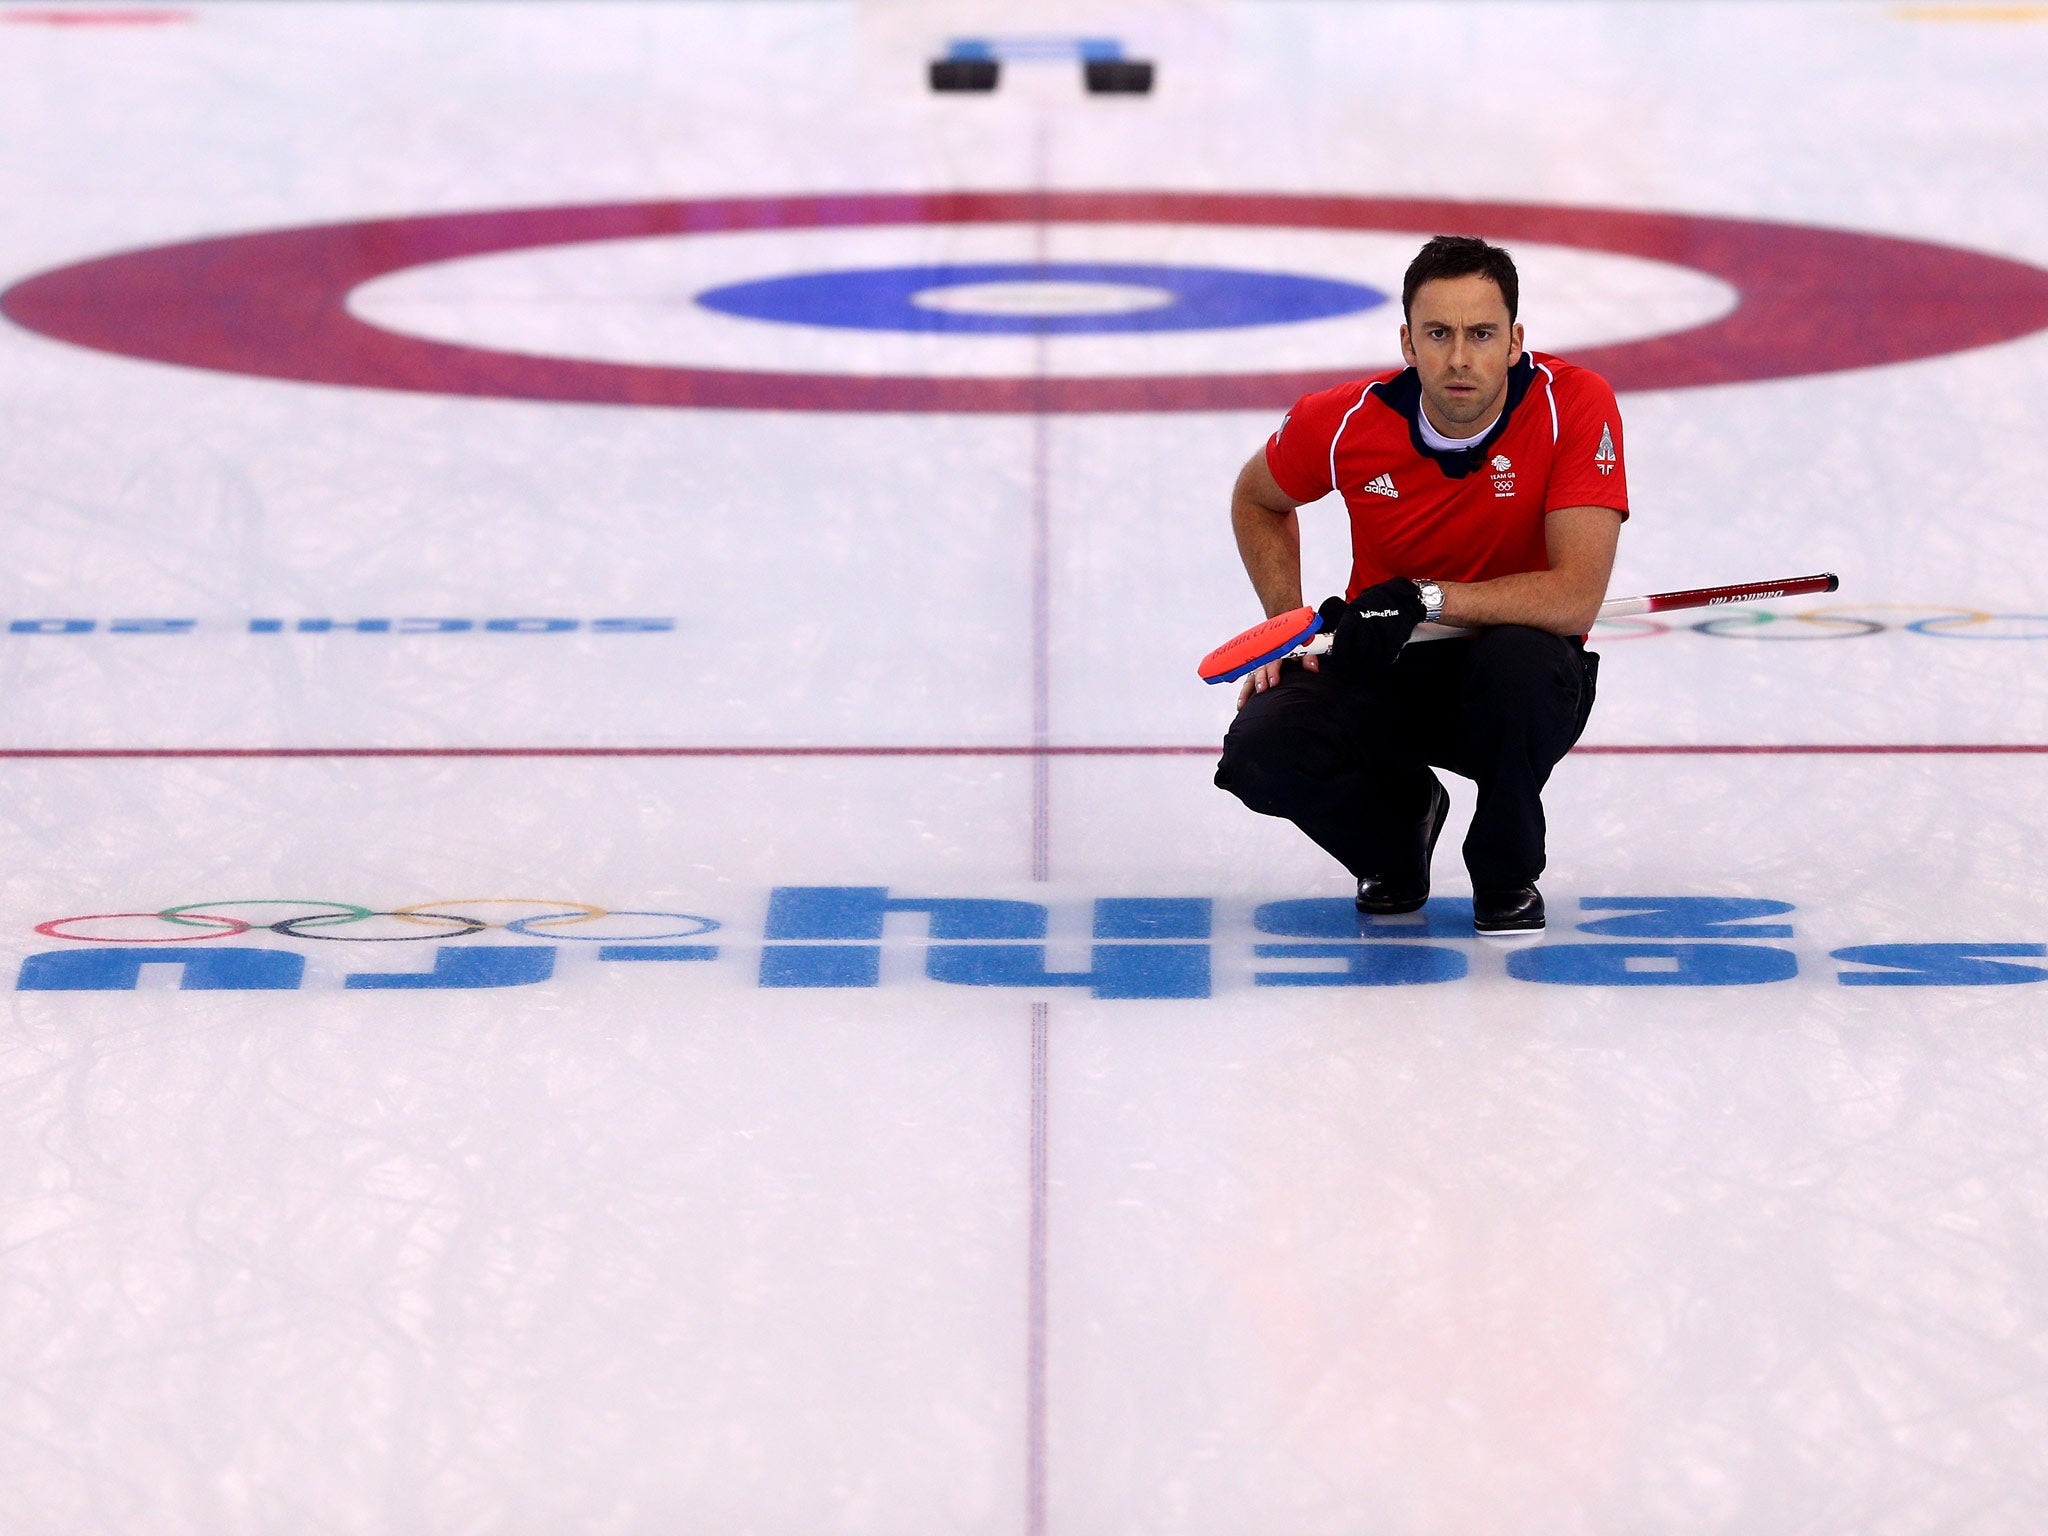 David Murdoch of Great Britain looks on during the Curling Men's Round Robin match between Great Britain and Norway